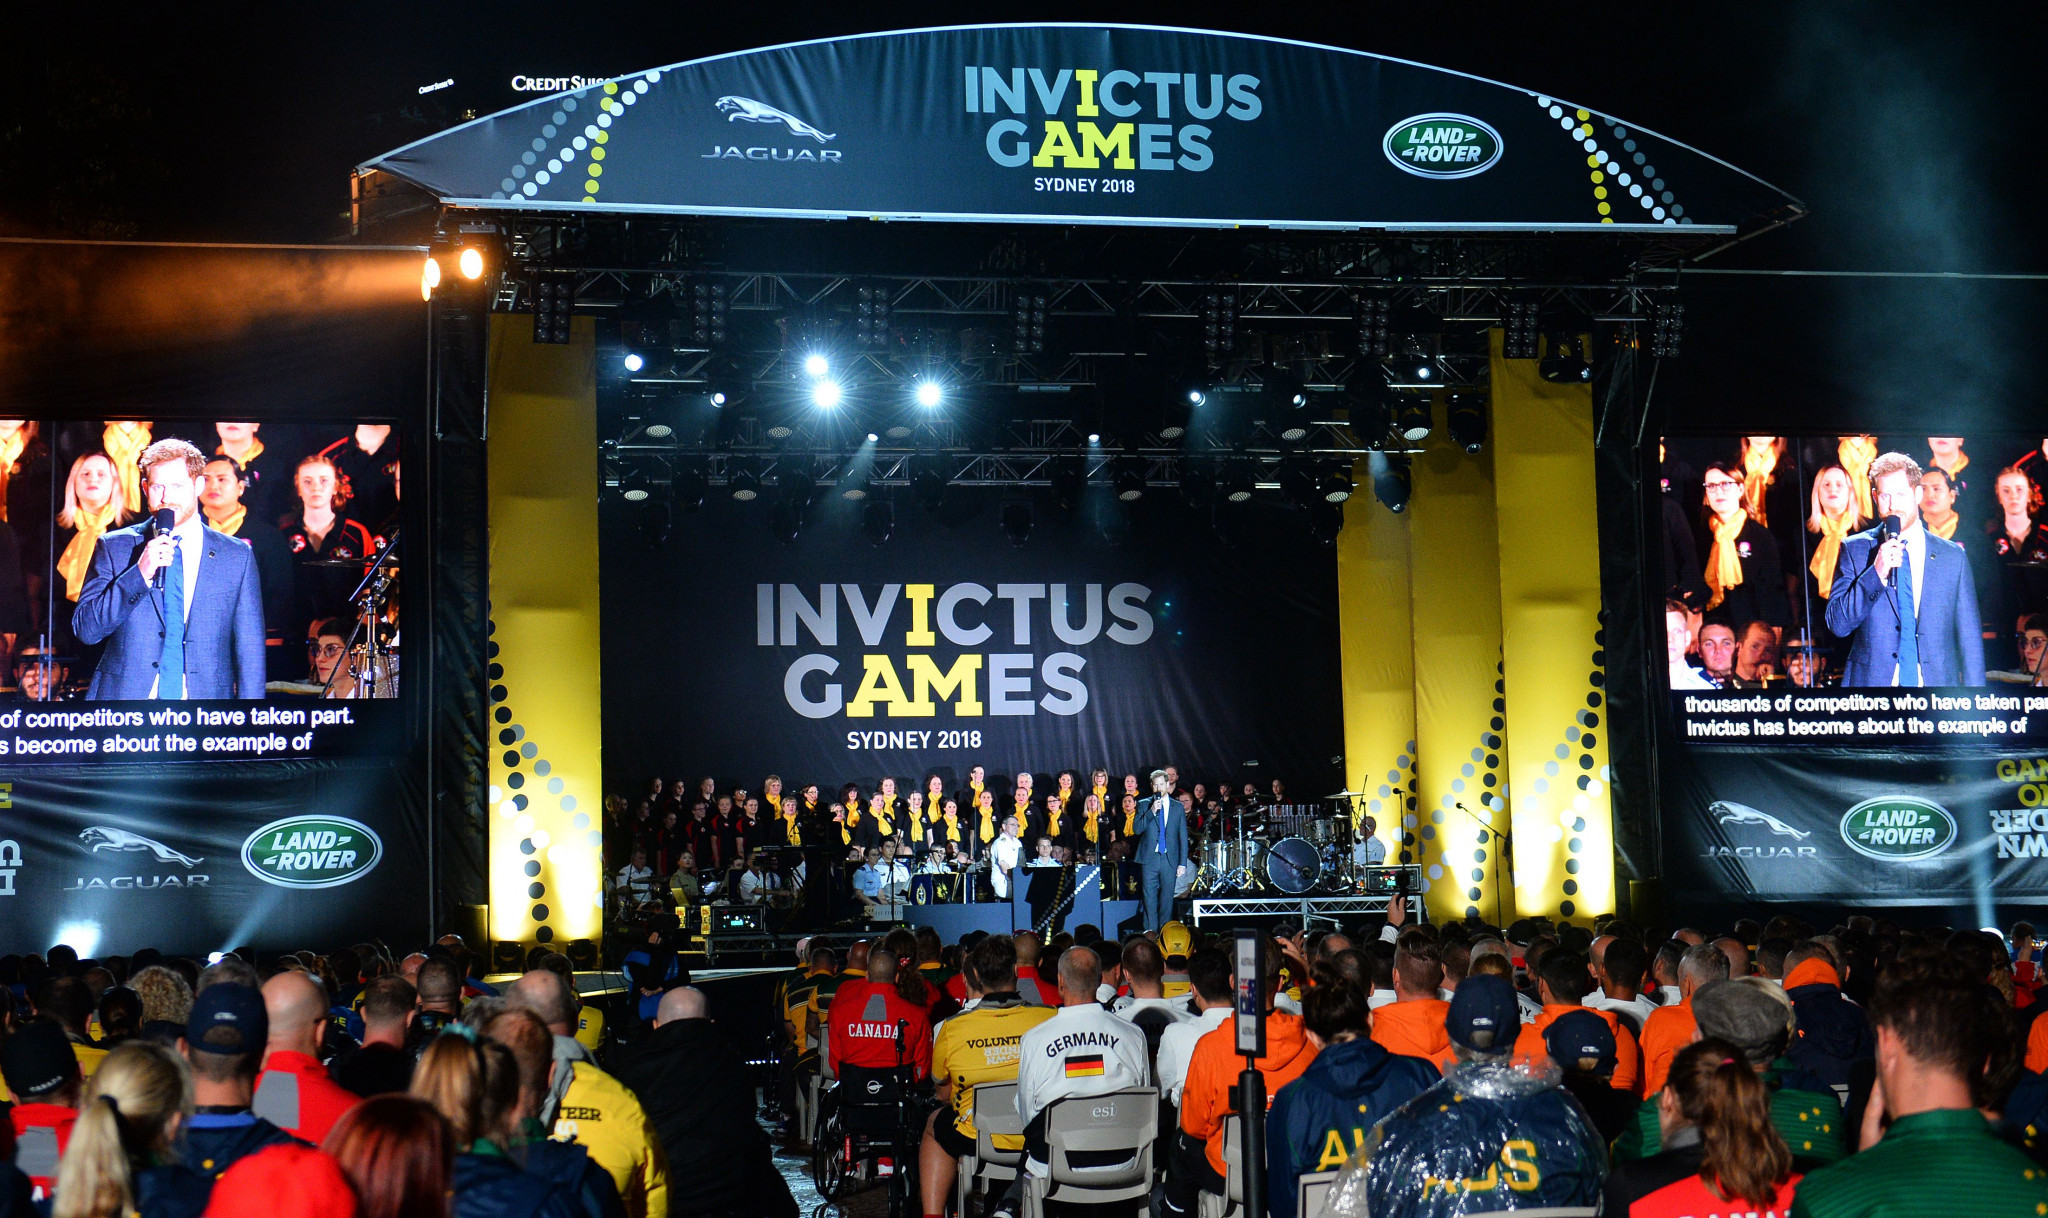 Sydney is hosting the fourth edition of the Invictus Games ©Getty Images